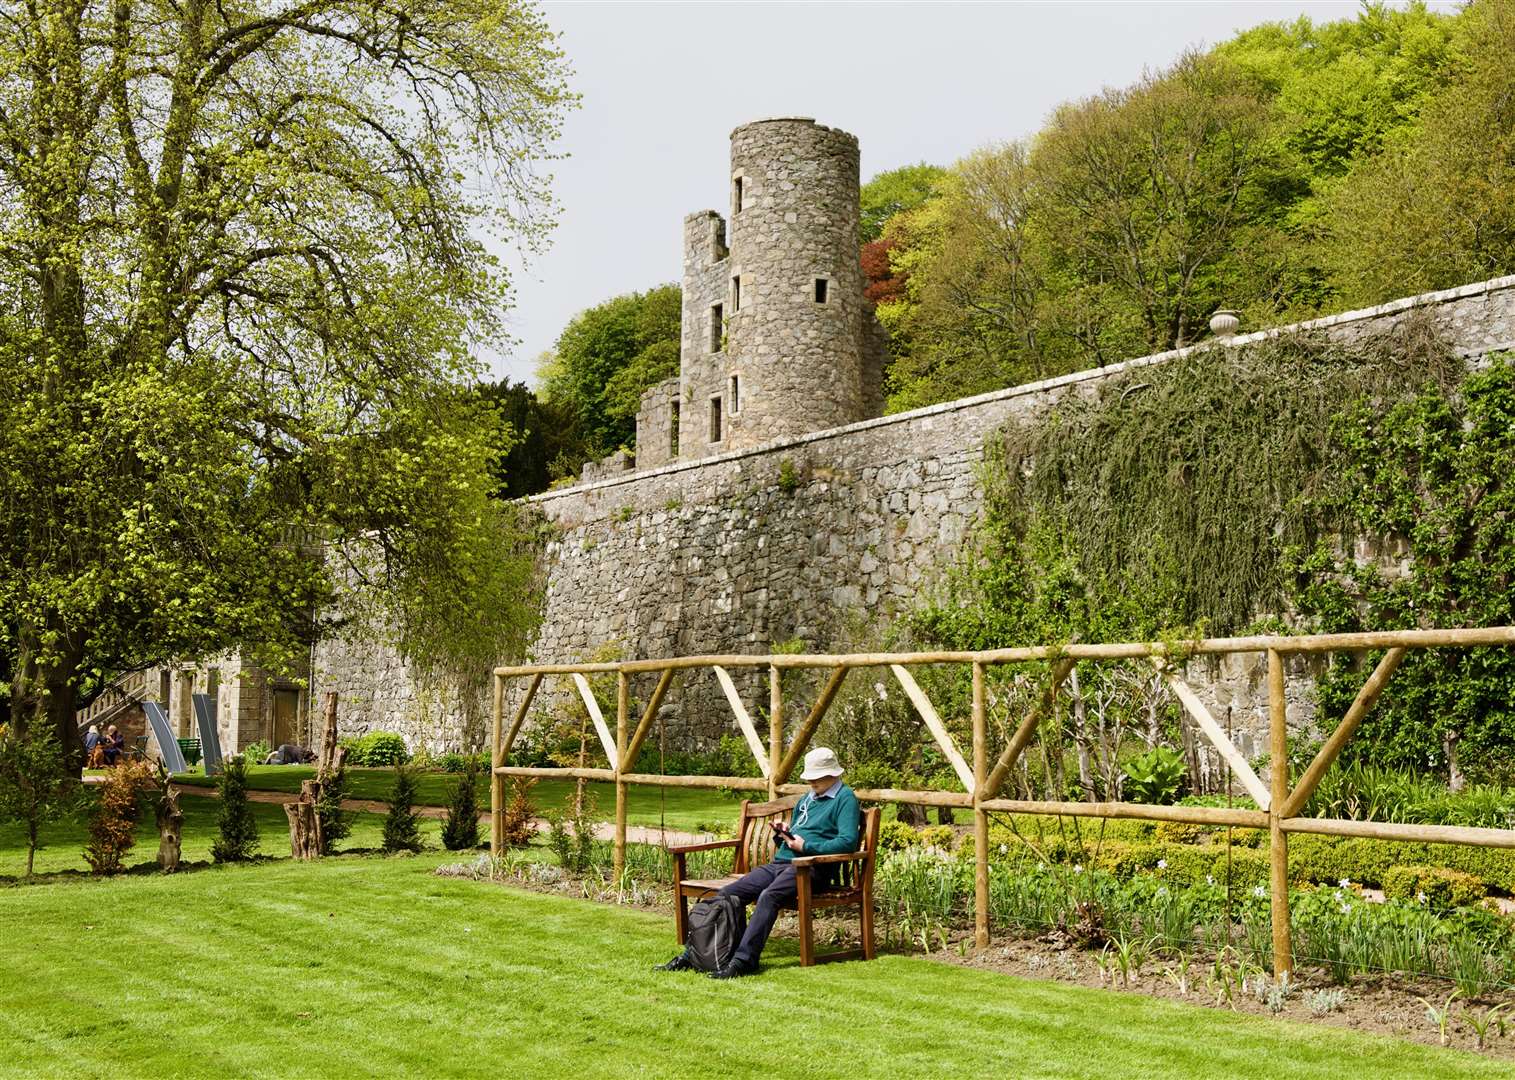 Mr Cameron was involved in the board of Ellon Castle Gardens from its inception till 2016, returning in 2018.